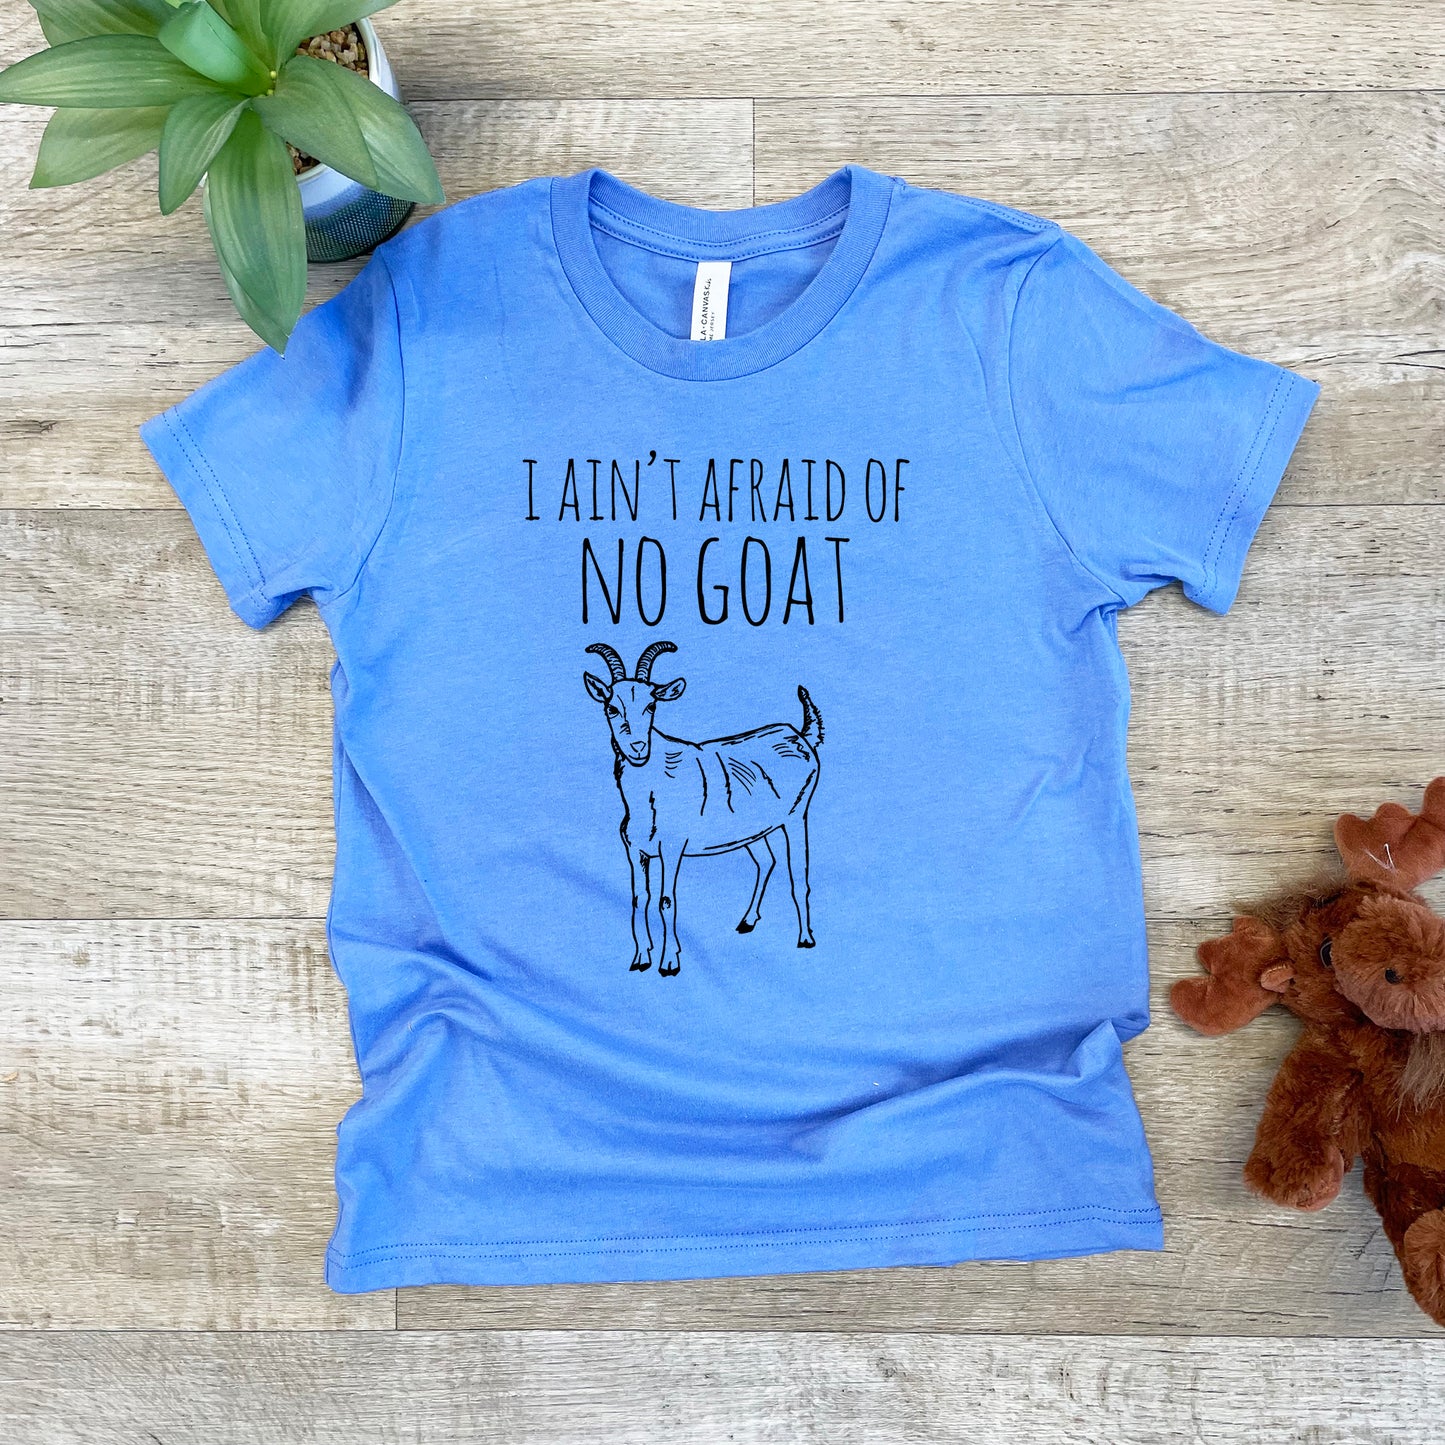 I Ain't Afraid of No Goat - Kid's Tee - Columbia Blue or Lavender